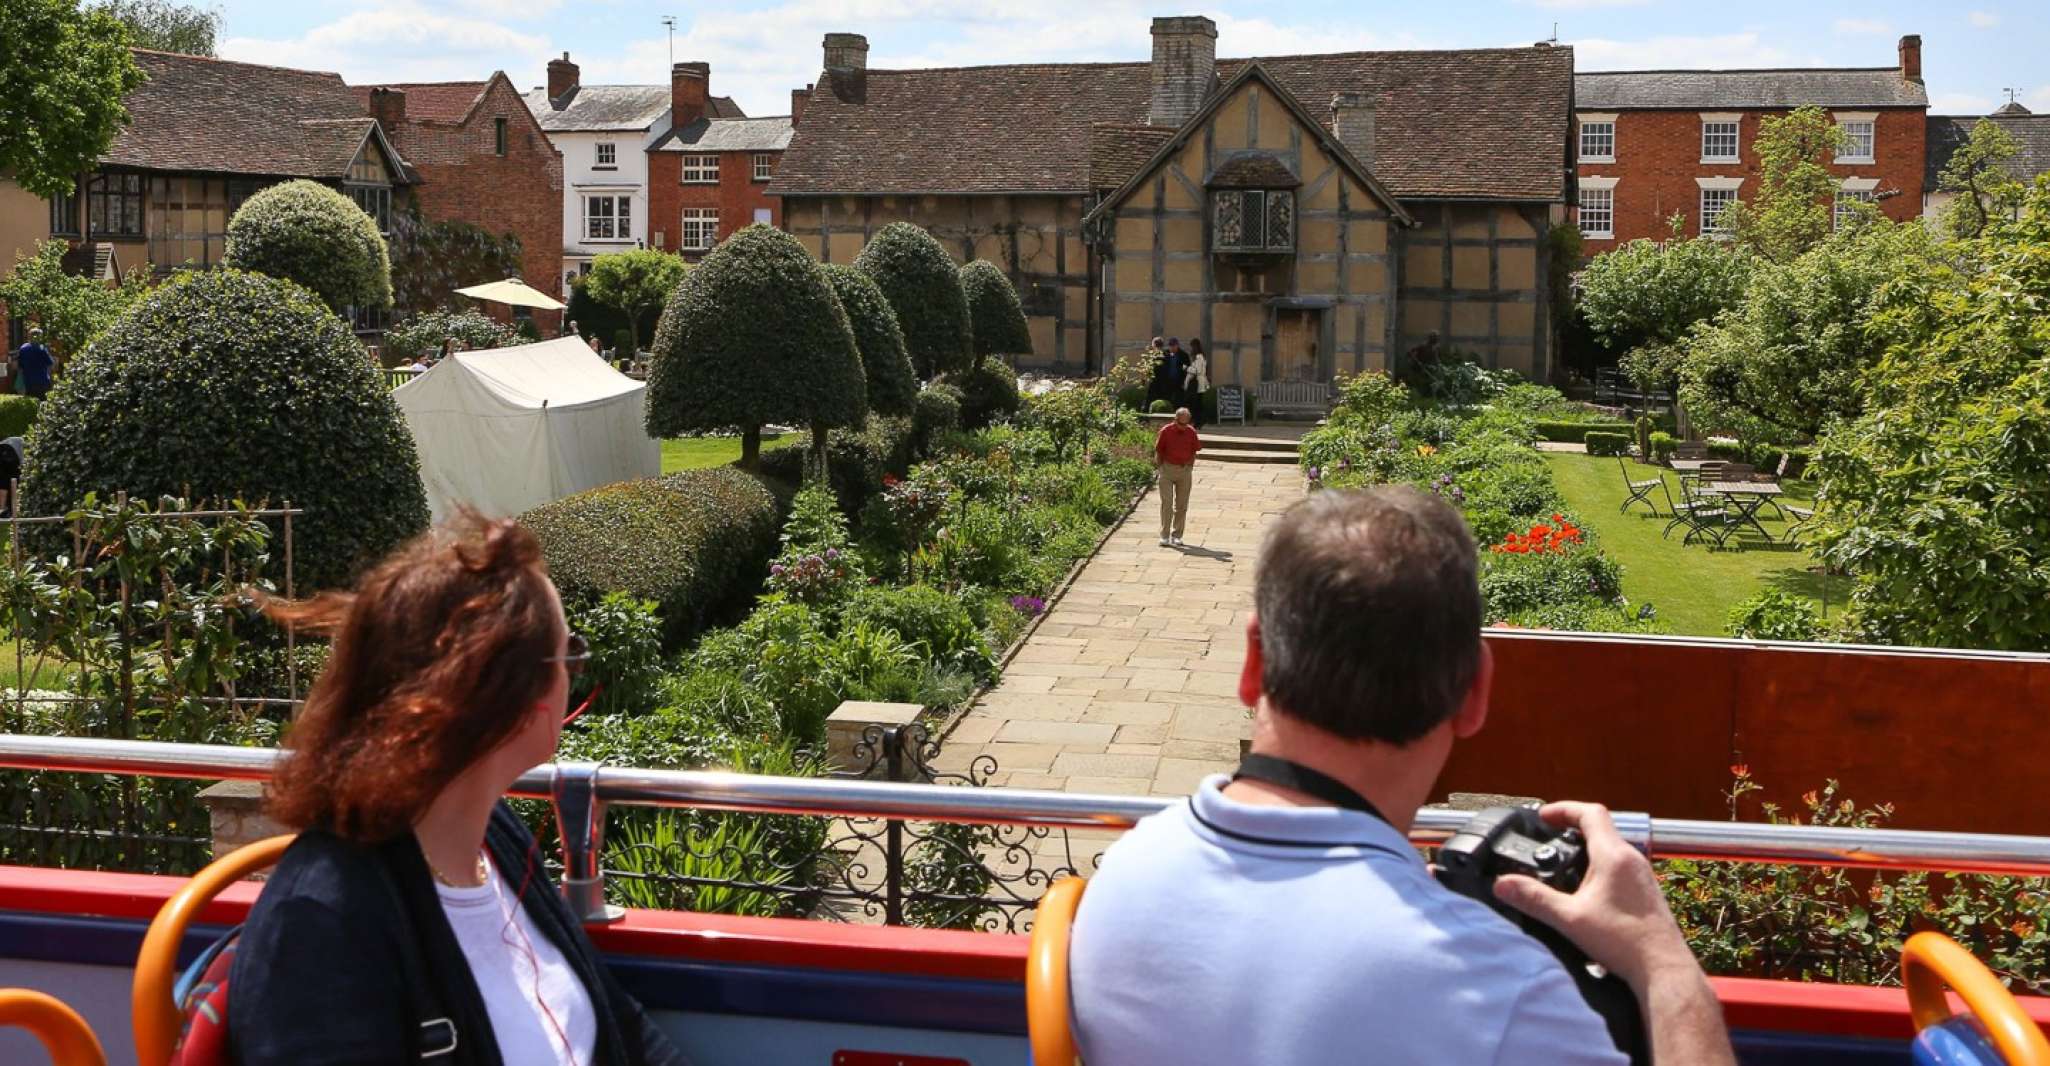 Stratford-upon-Avon,City Sightseeing Hop-On Hop-Off Bus Tour - Housity